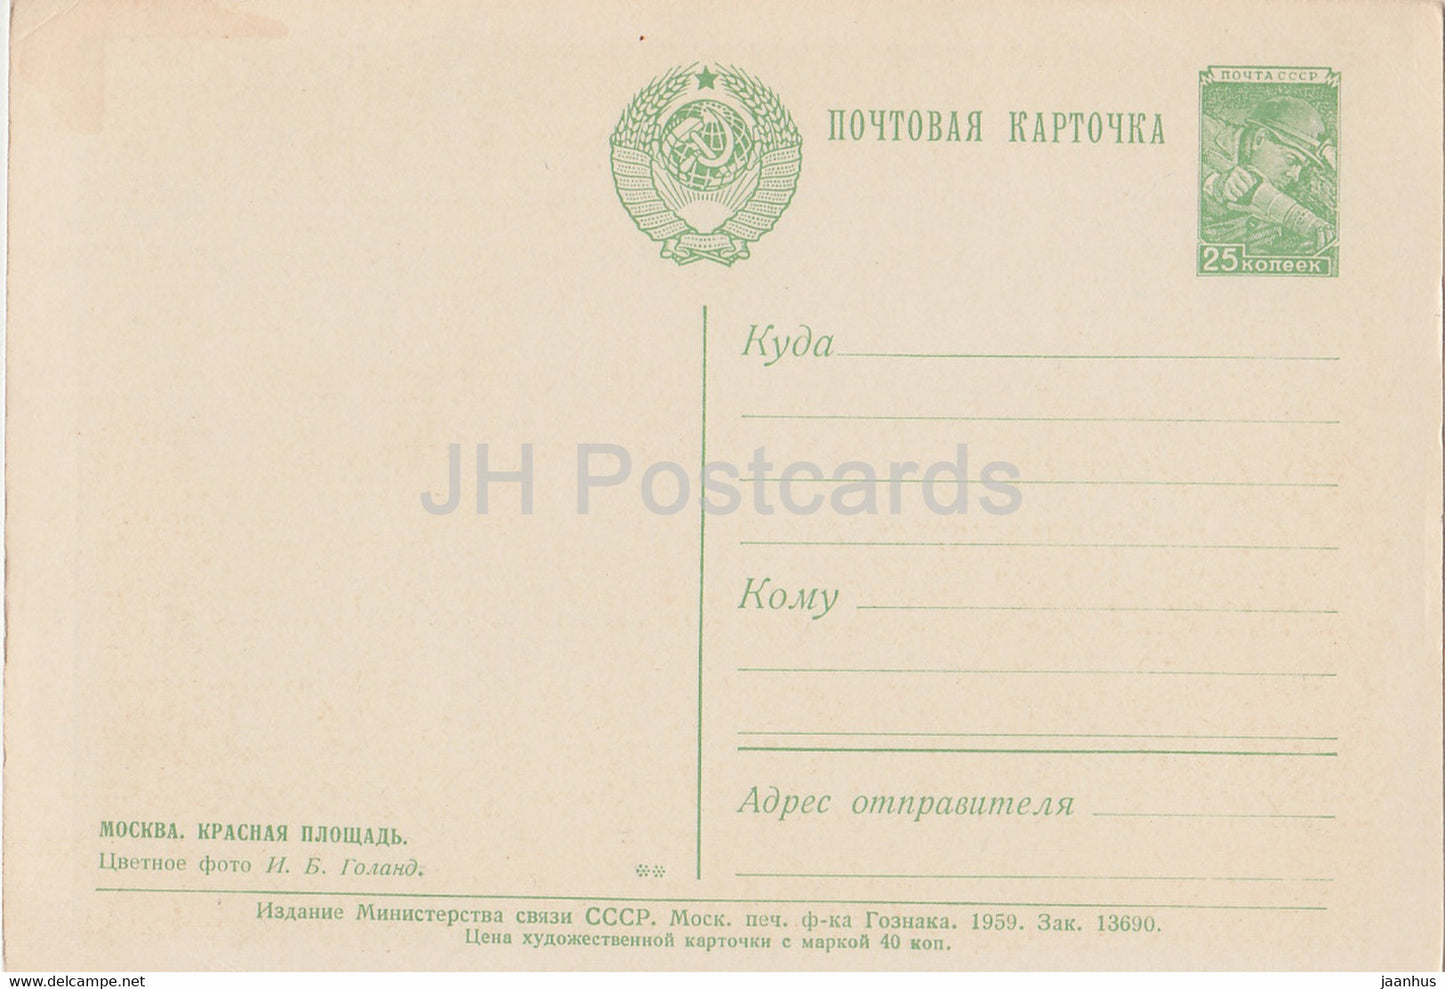 Moscow - Red Square - postal stationery - 1959 - Russia USSR - unused